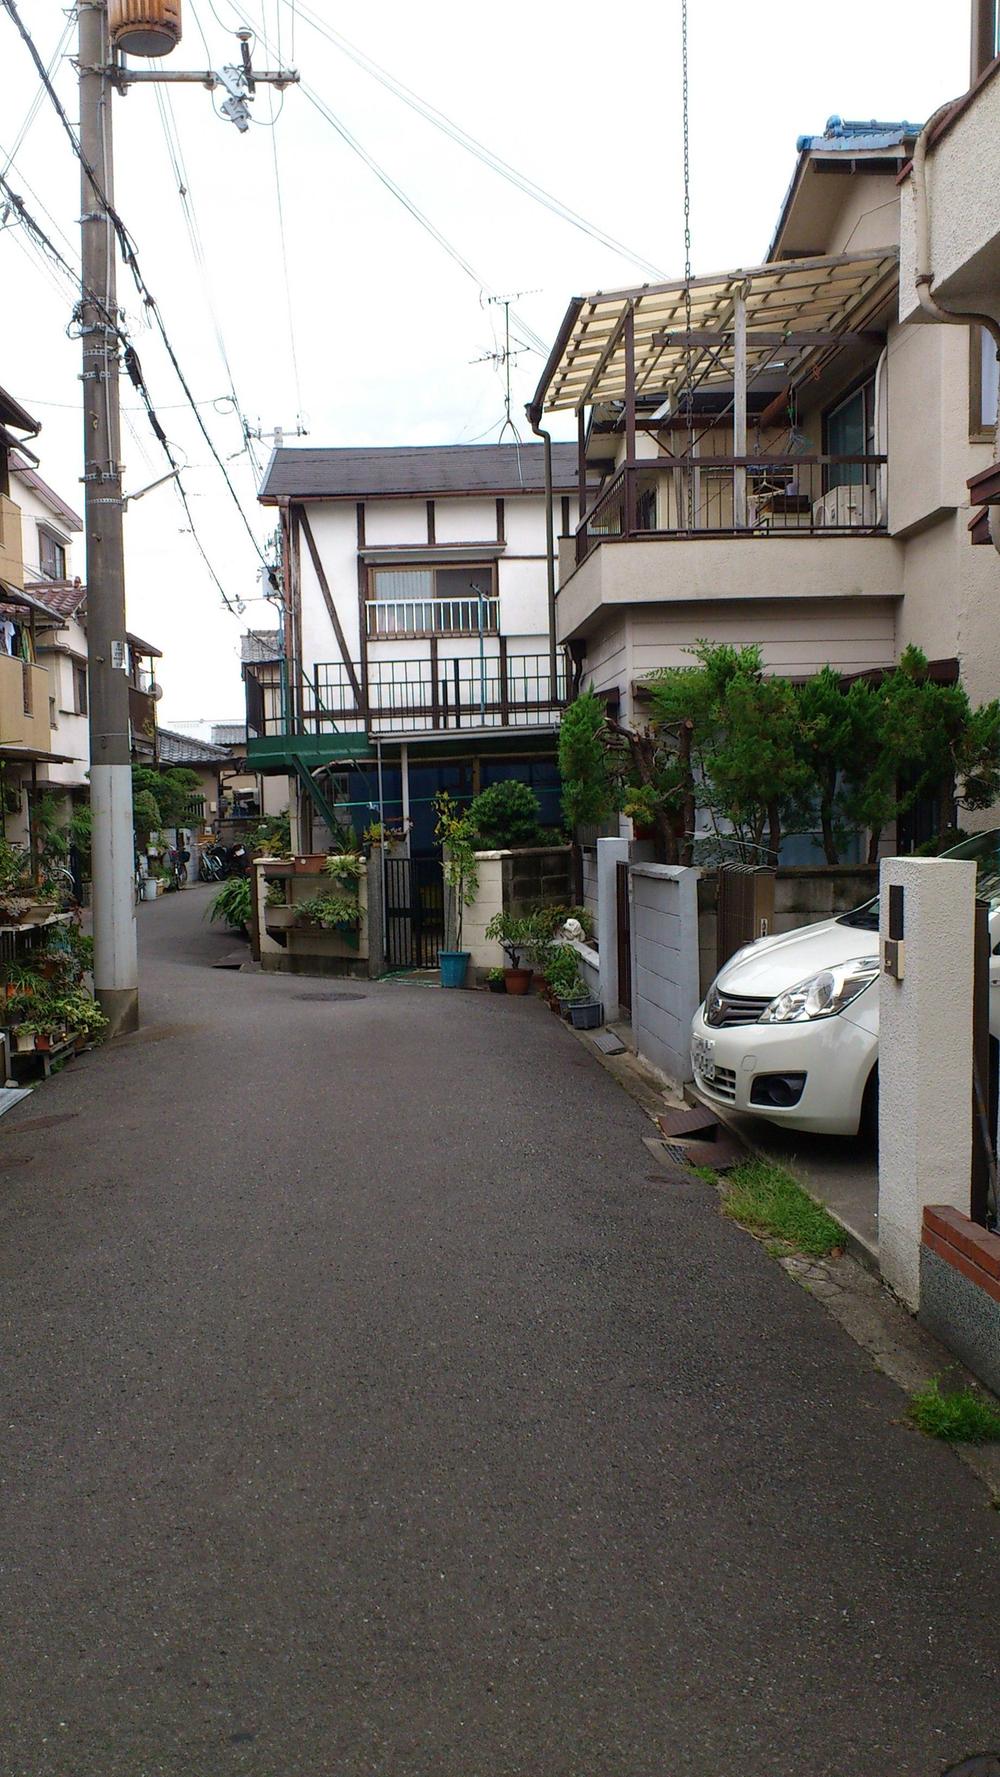 Local appearance photo. It is a property that is located in a quiet residential area.